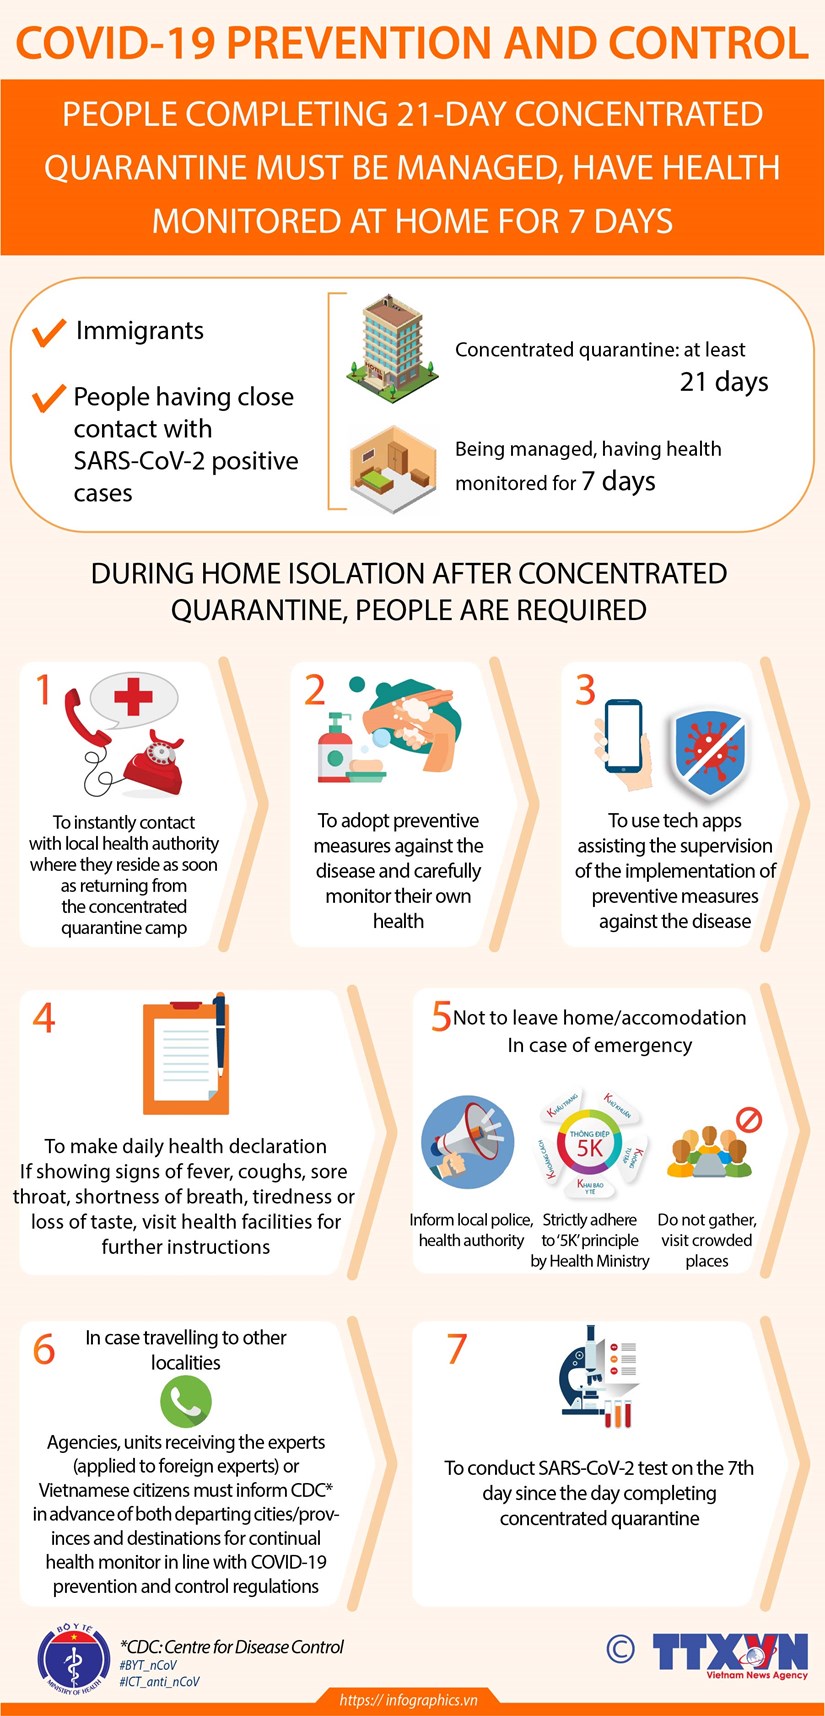 People completing concentrated quarantine must be monitored for 7 days hinh anh 1